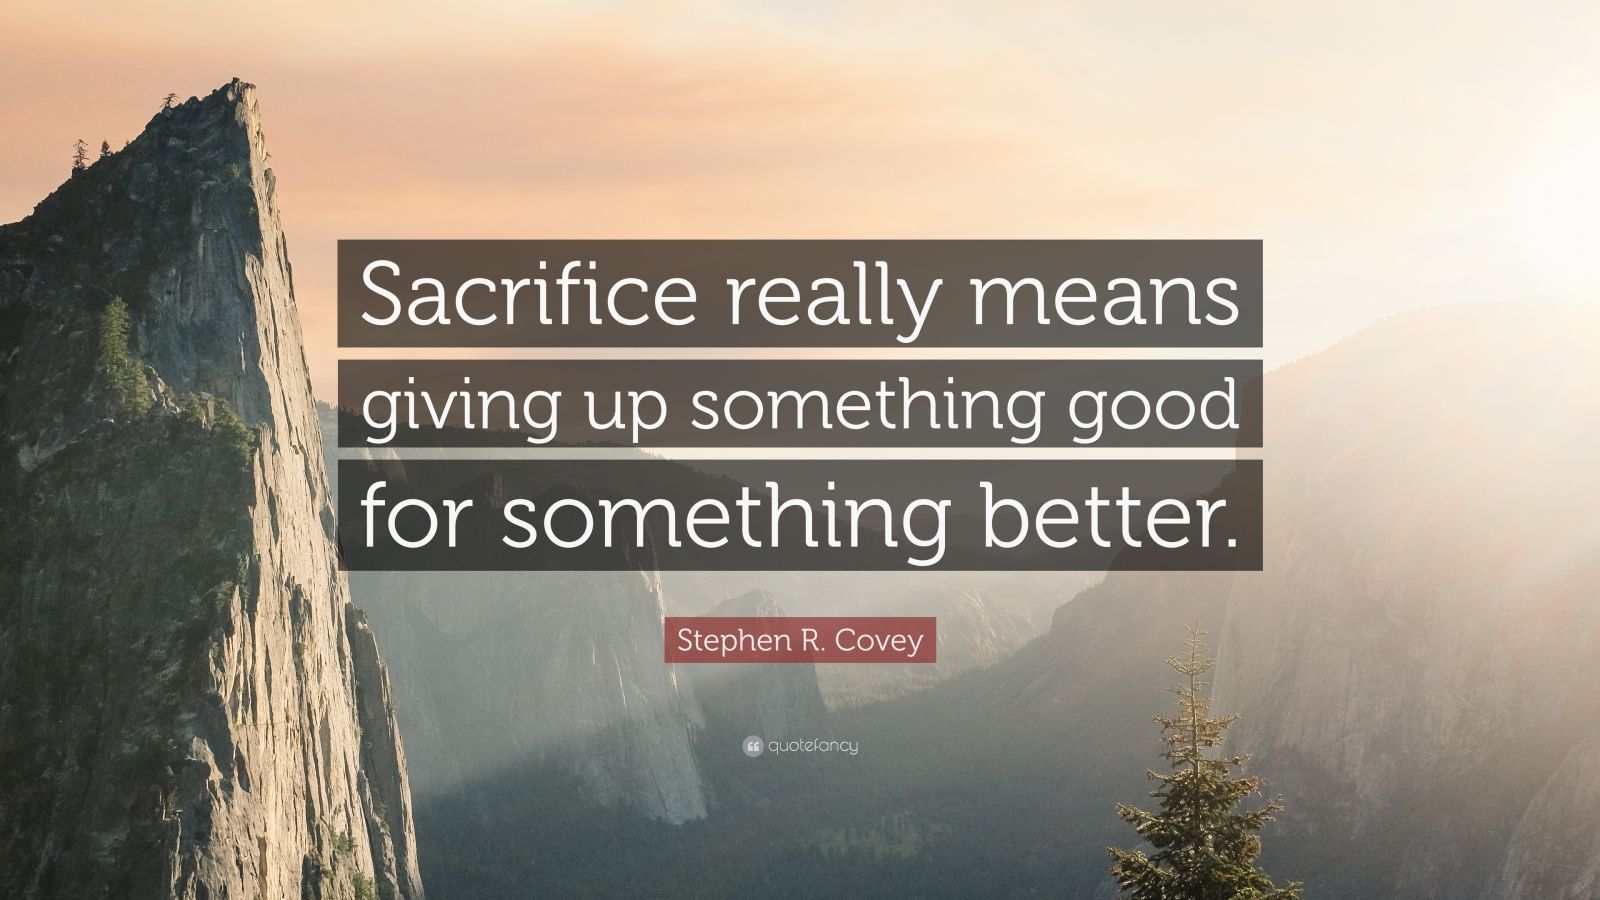 Stephen R. Covey Quote: “Sacrifice really means giving up something